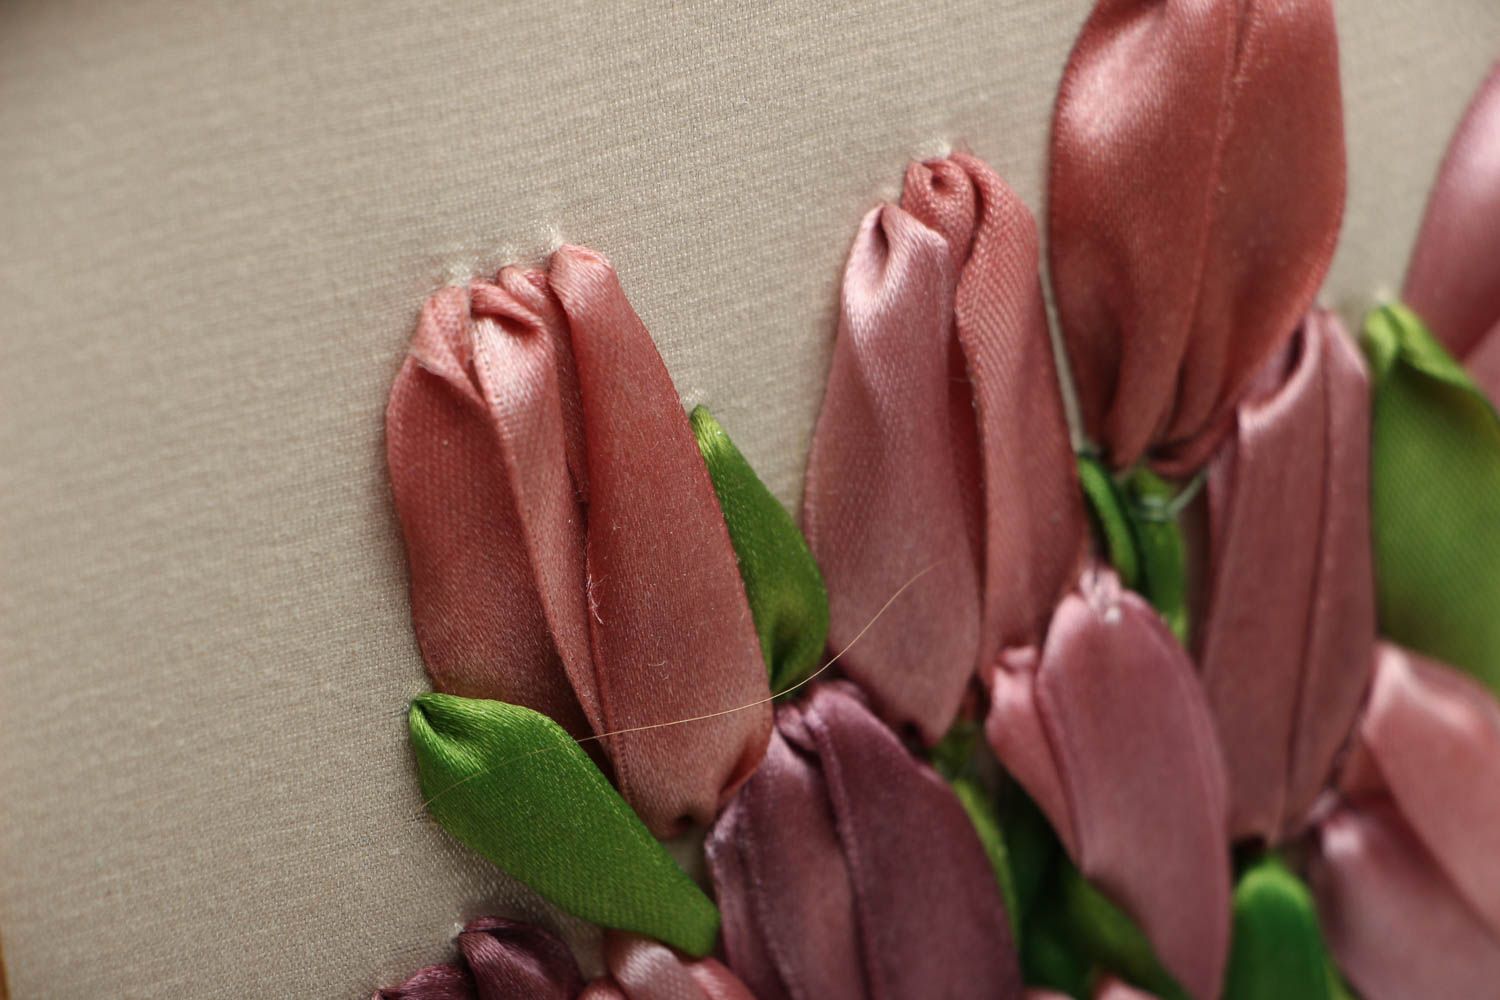 Picture embroidered with ribbons Tulips photo 2